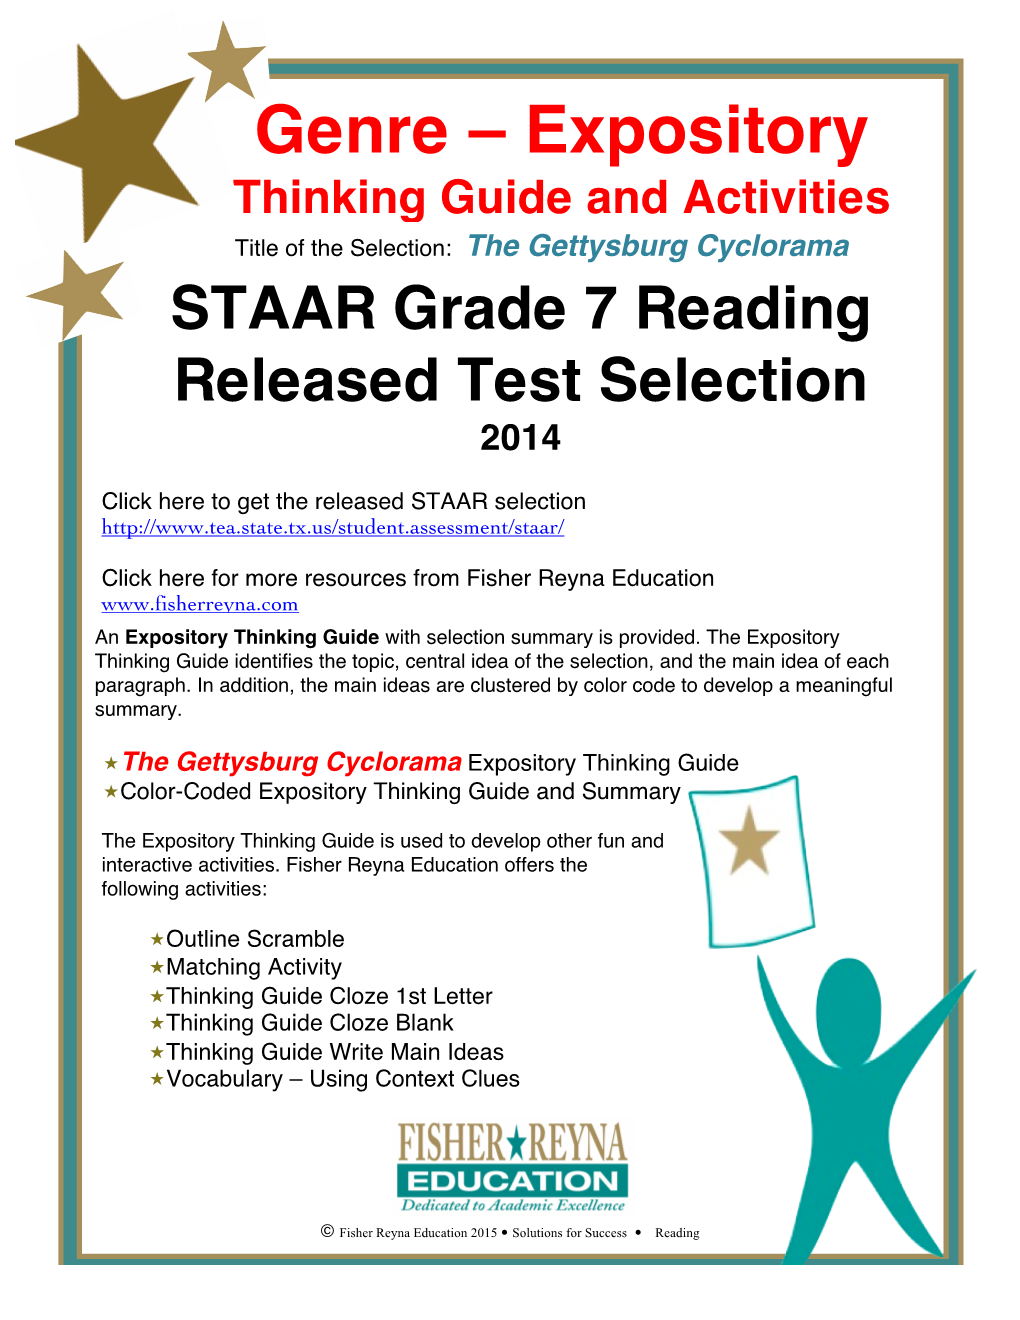 The Gettysburg Cyclorama STAAR Grade 7 Reading Released Test Selection 2014